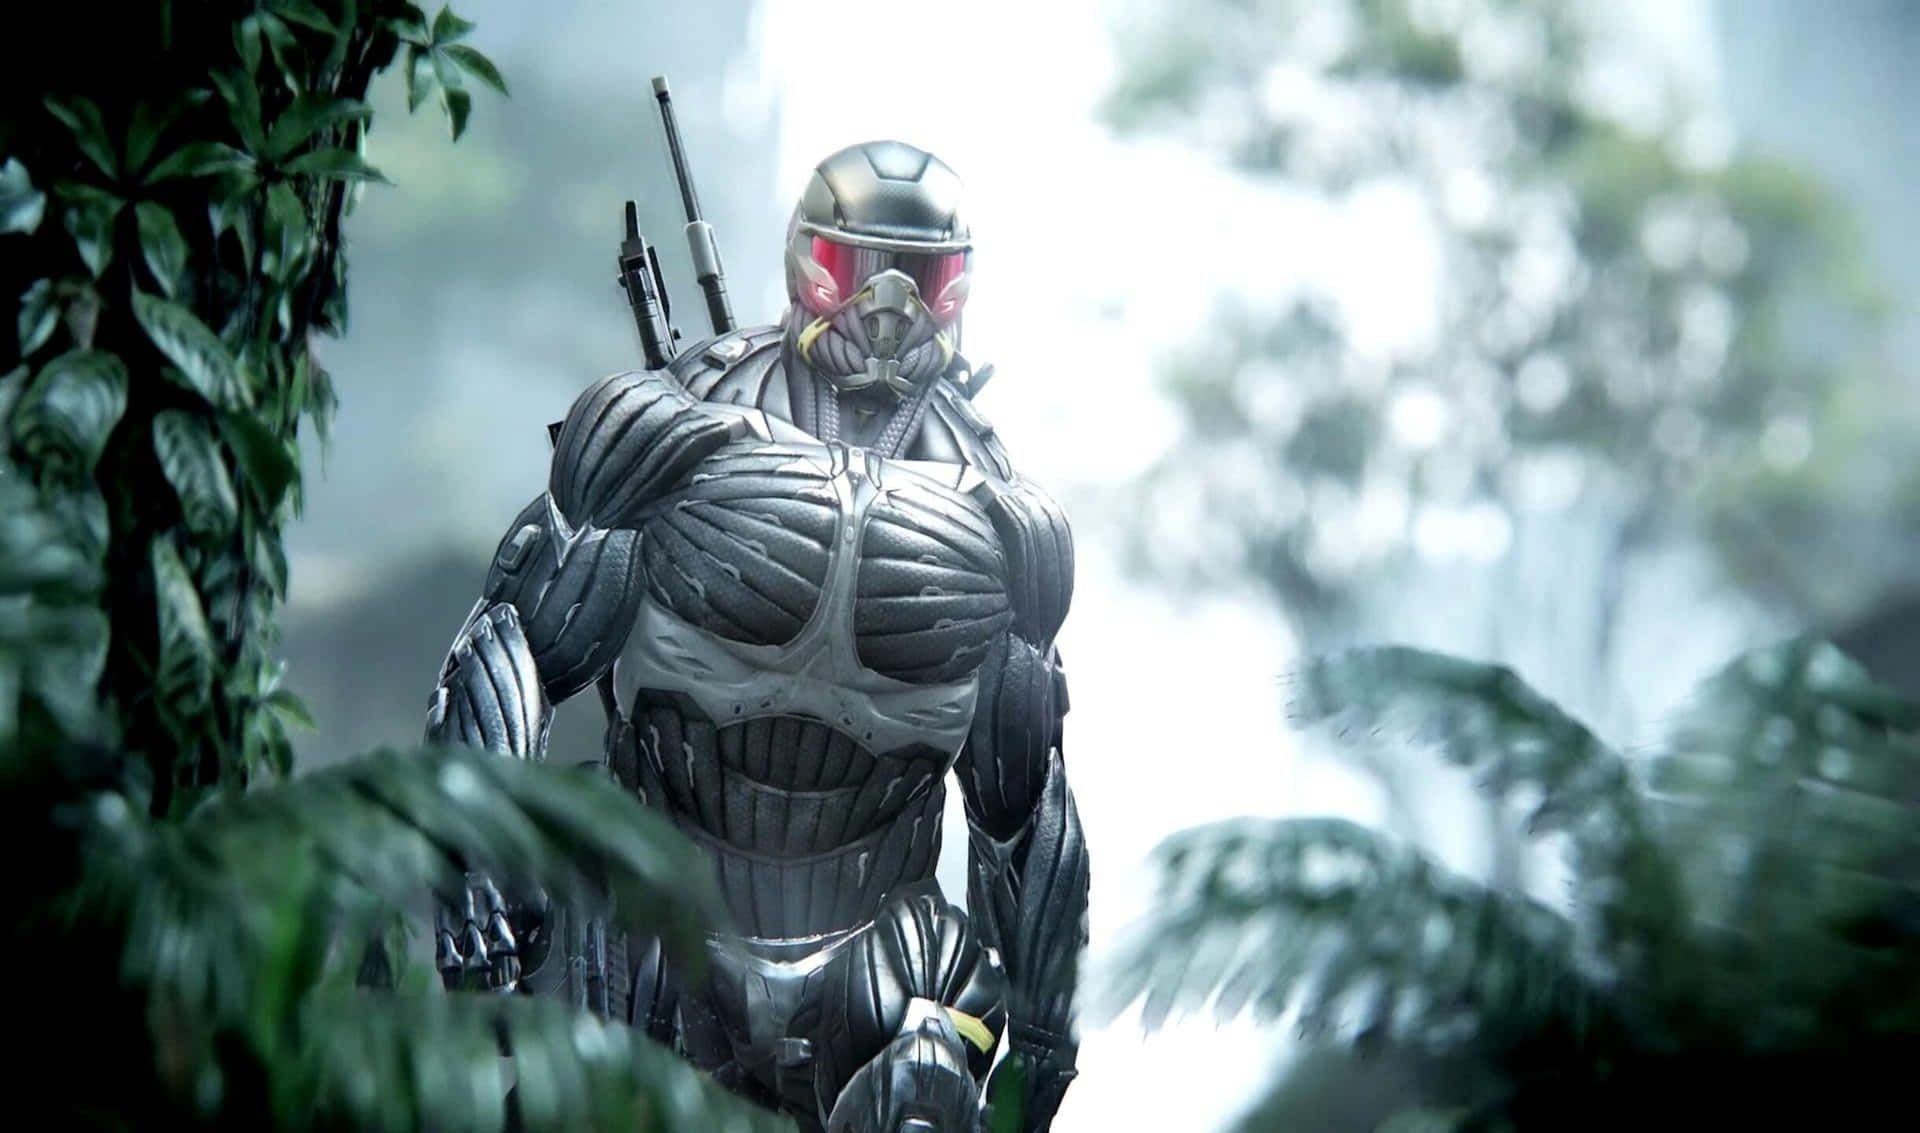 Prepare for Battle: Take in the Beauty of Crysis 3